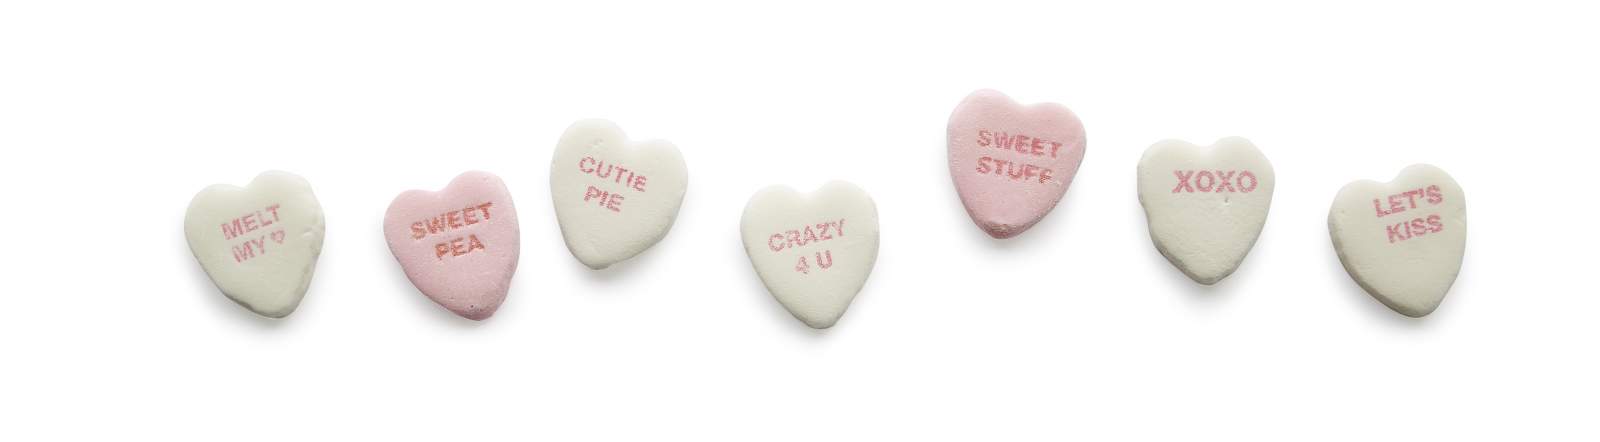 pink and white valentines day heart shaped candy